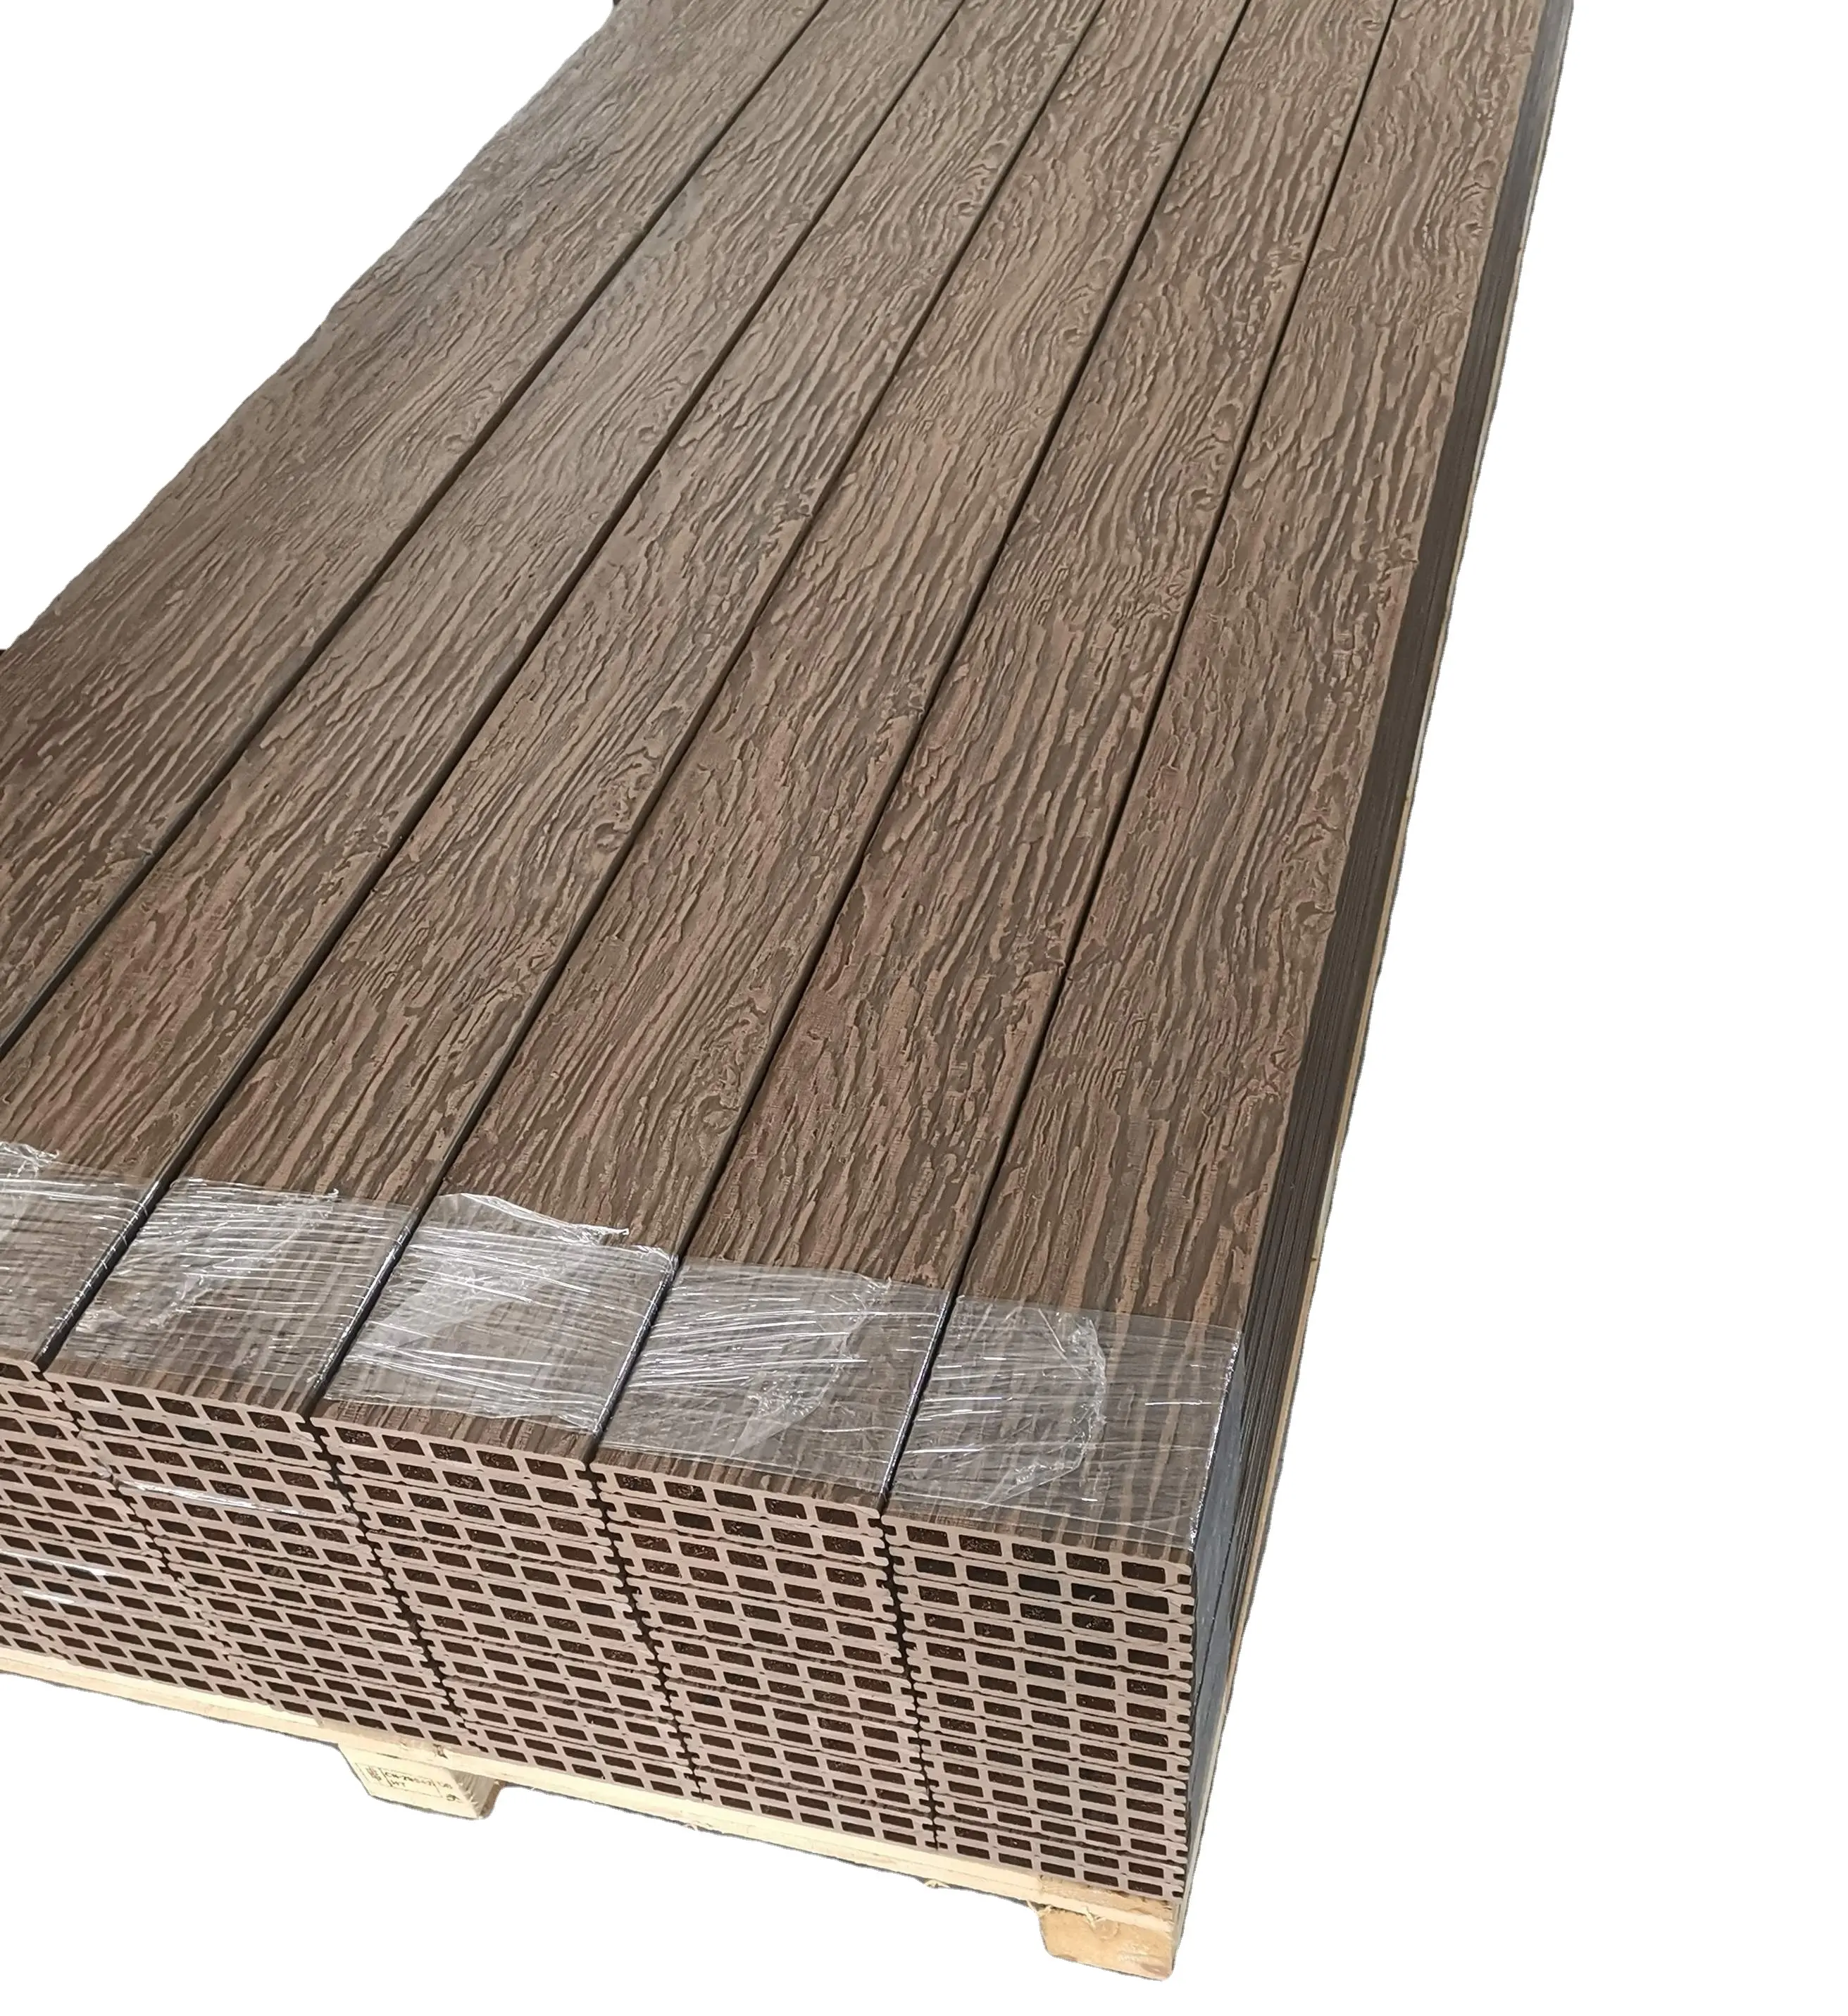 Latest and BEST 2020 outdoor swimming pool wpc wood-plastic composite decking board/solid wpc deck floor